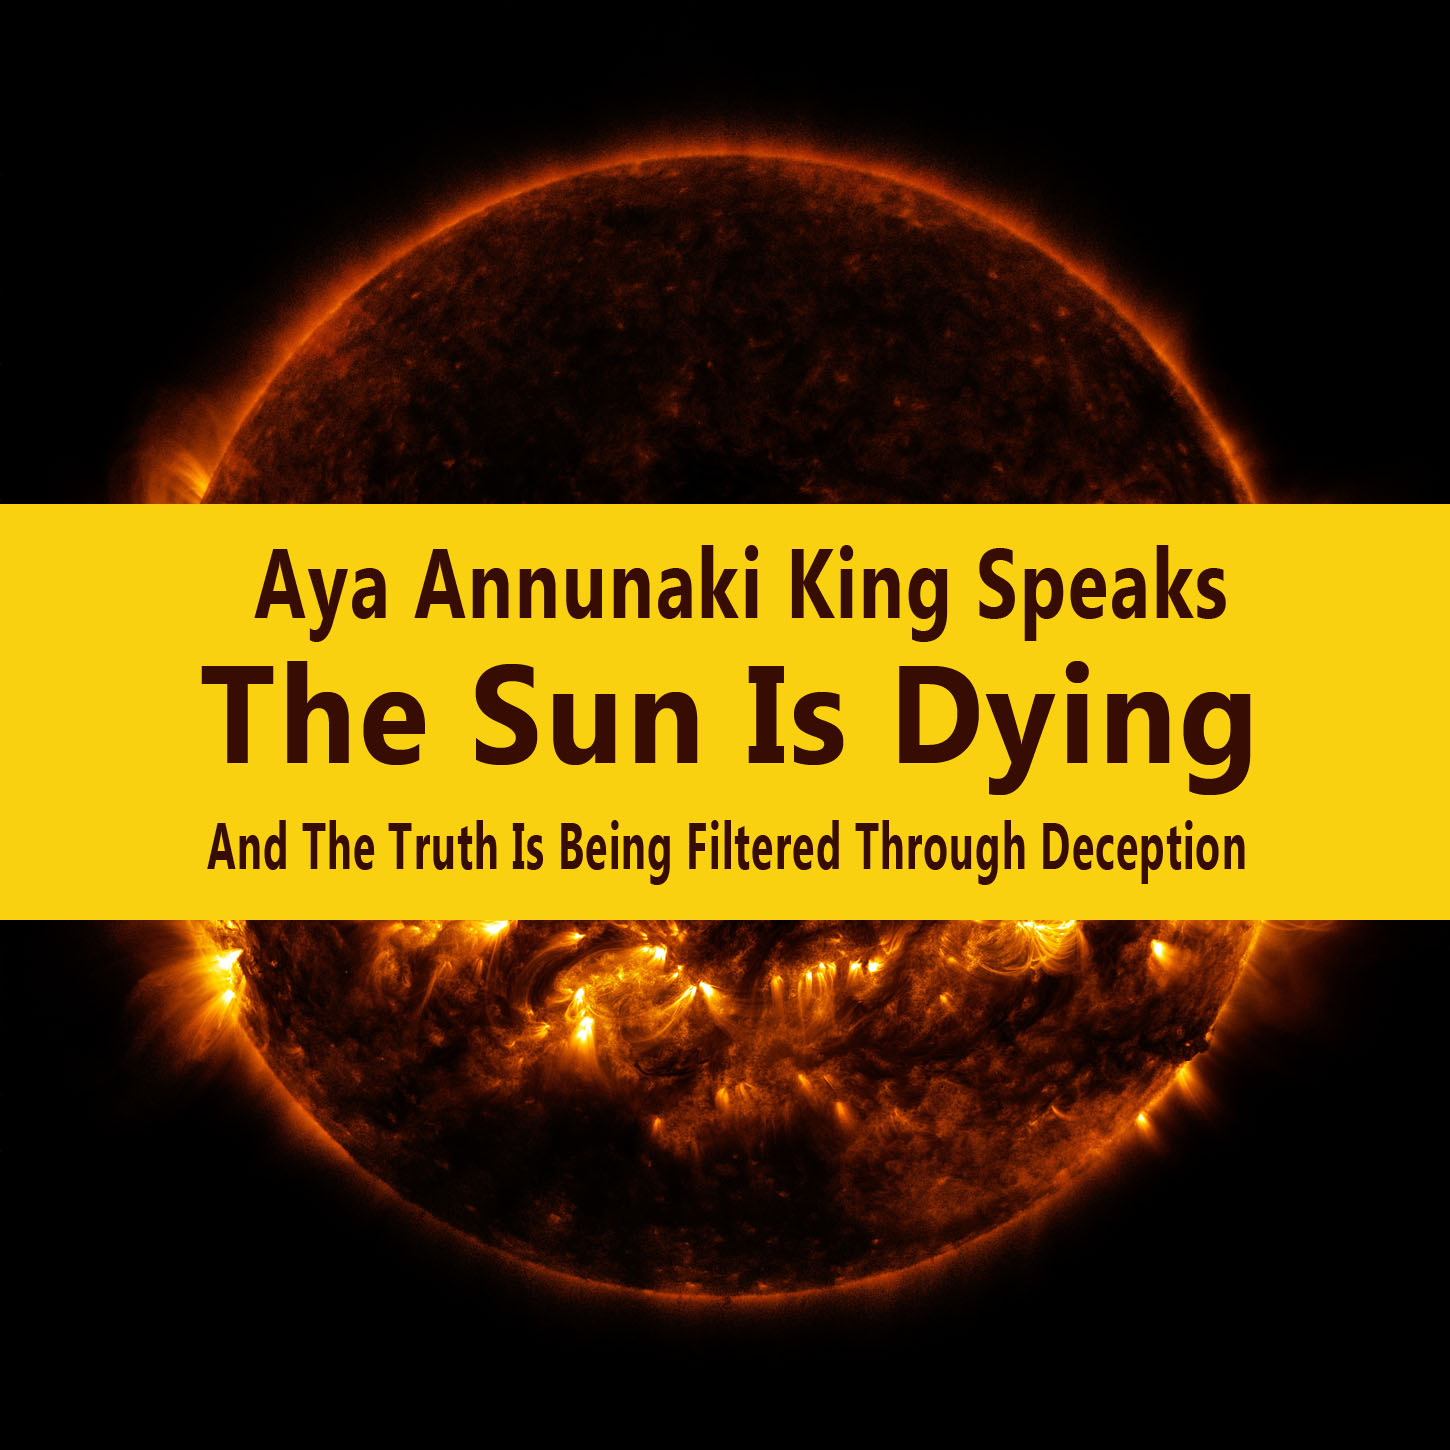 The Sun Dying